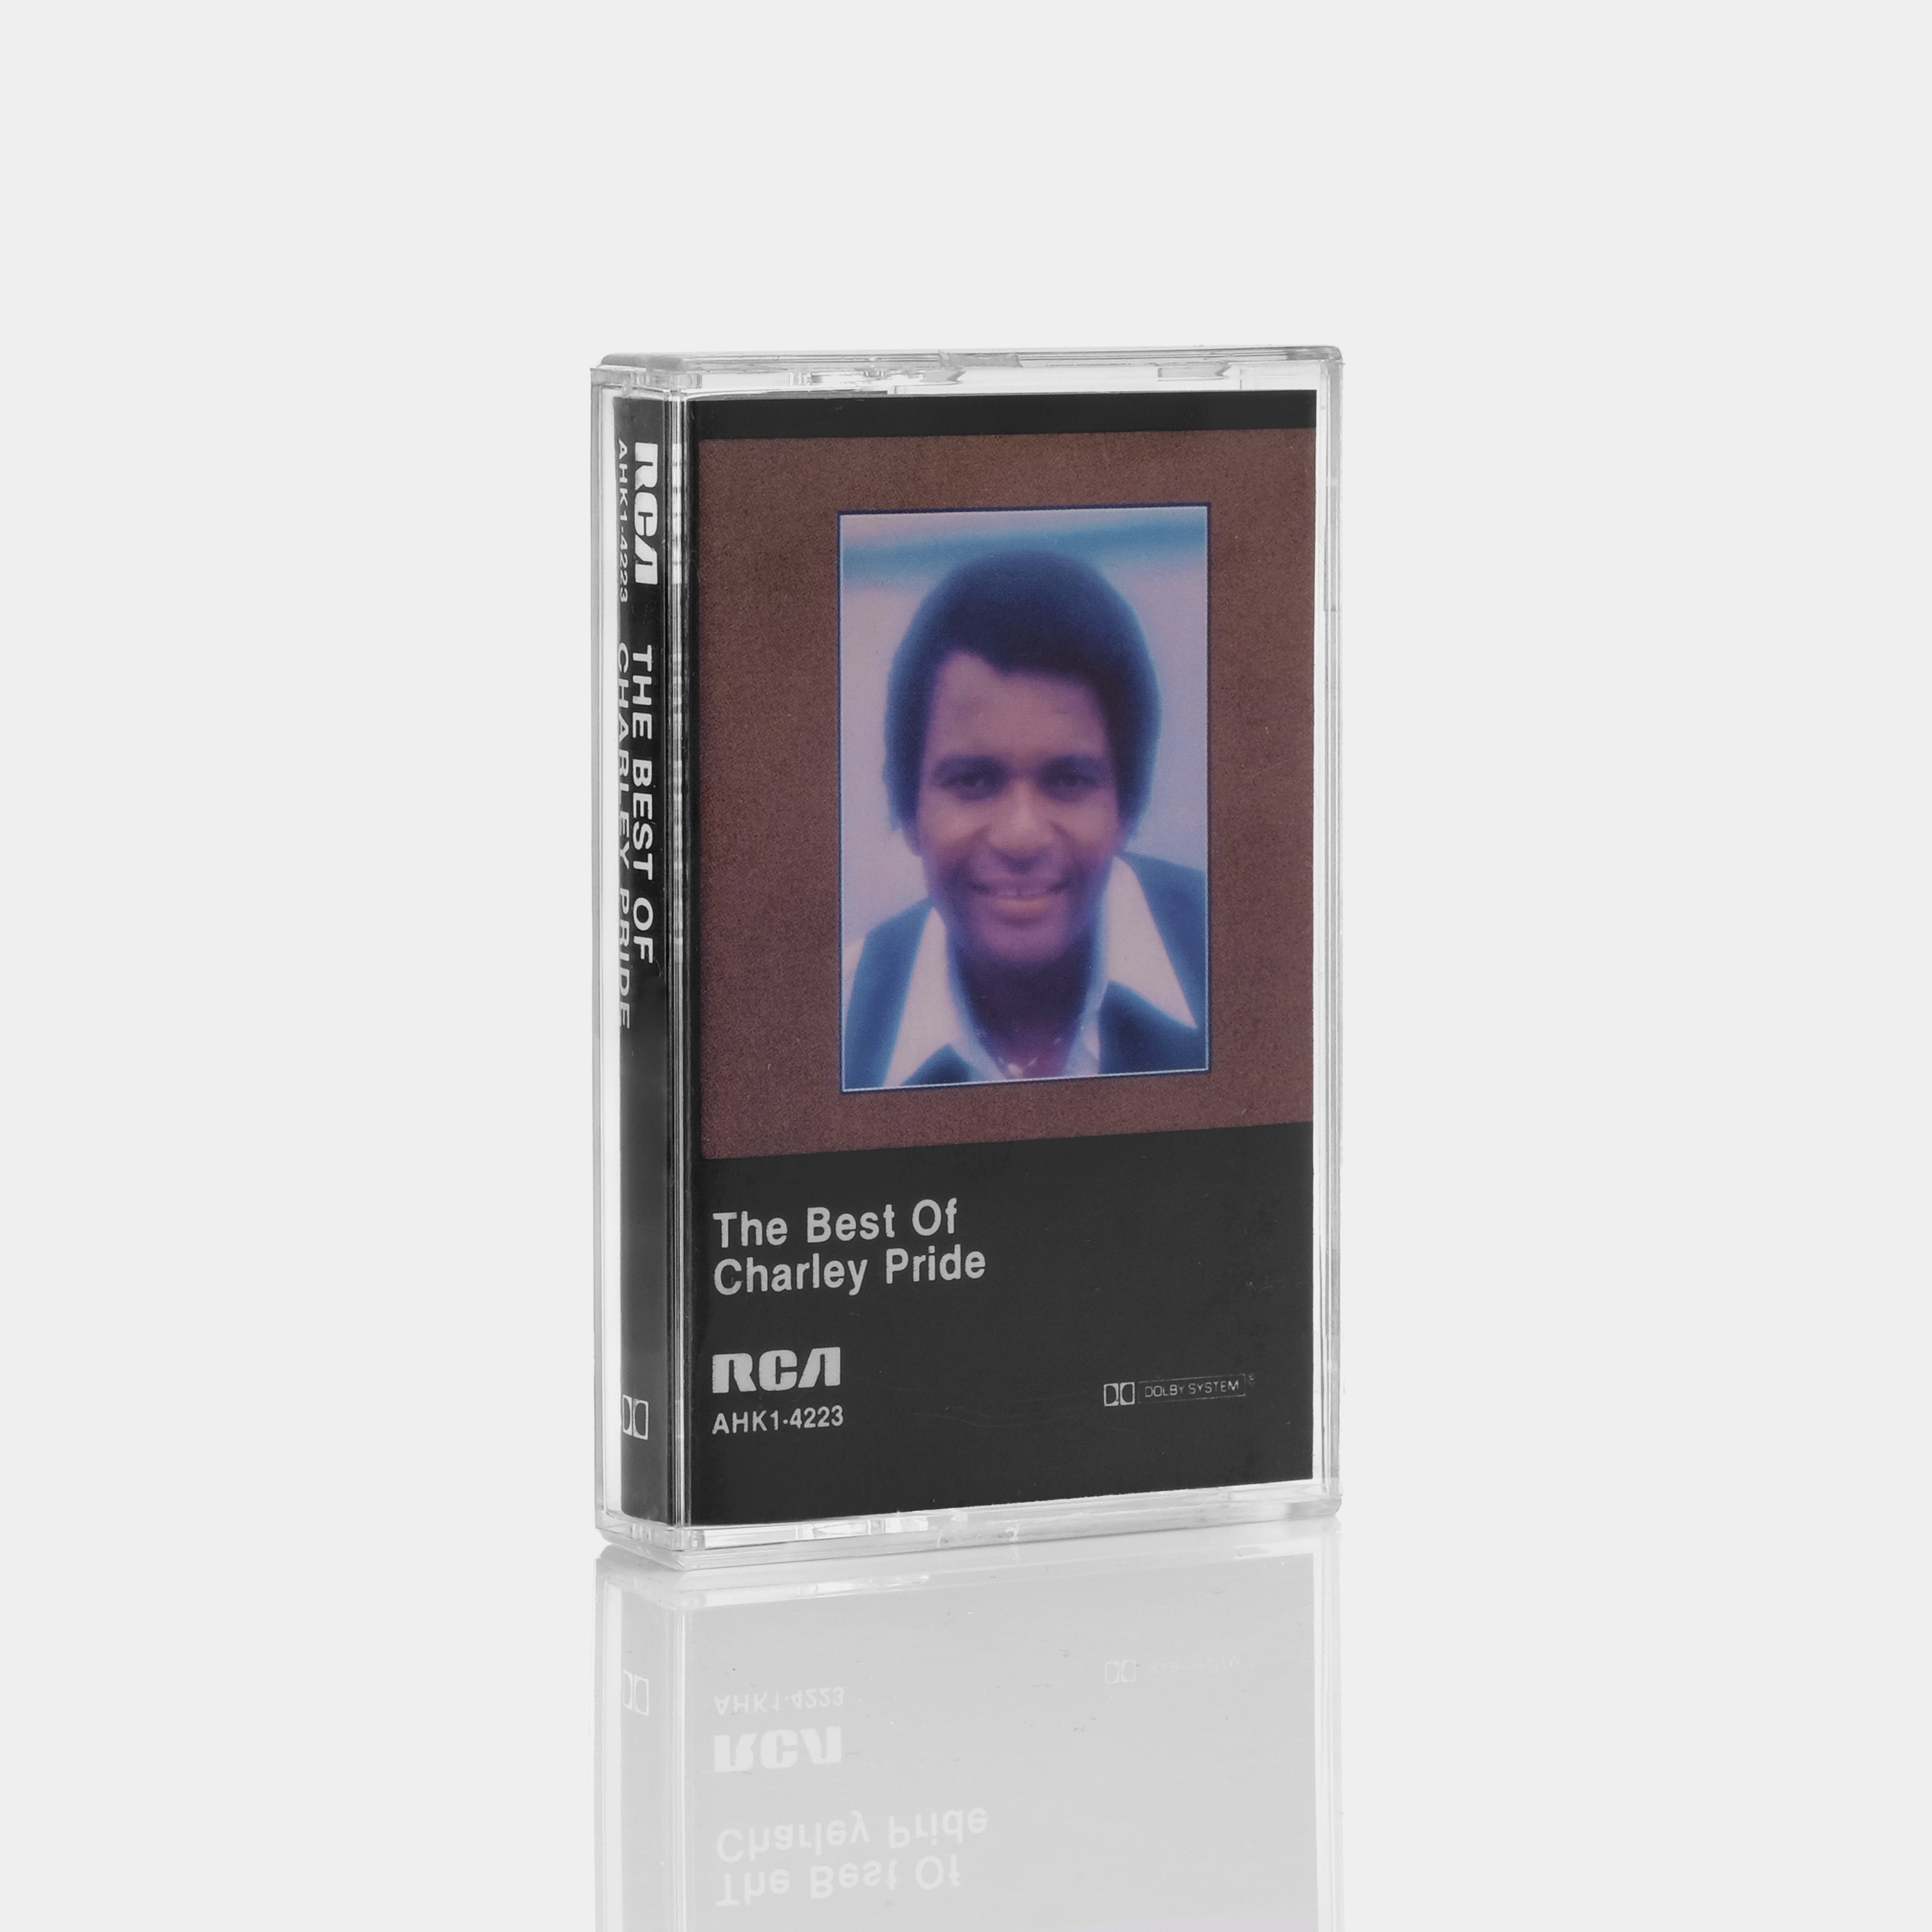 The Best Of Charley Pride Cassette Tape